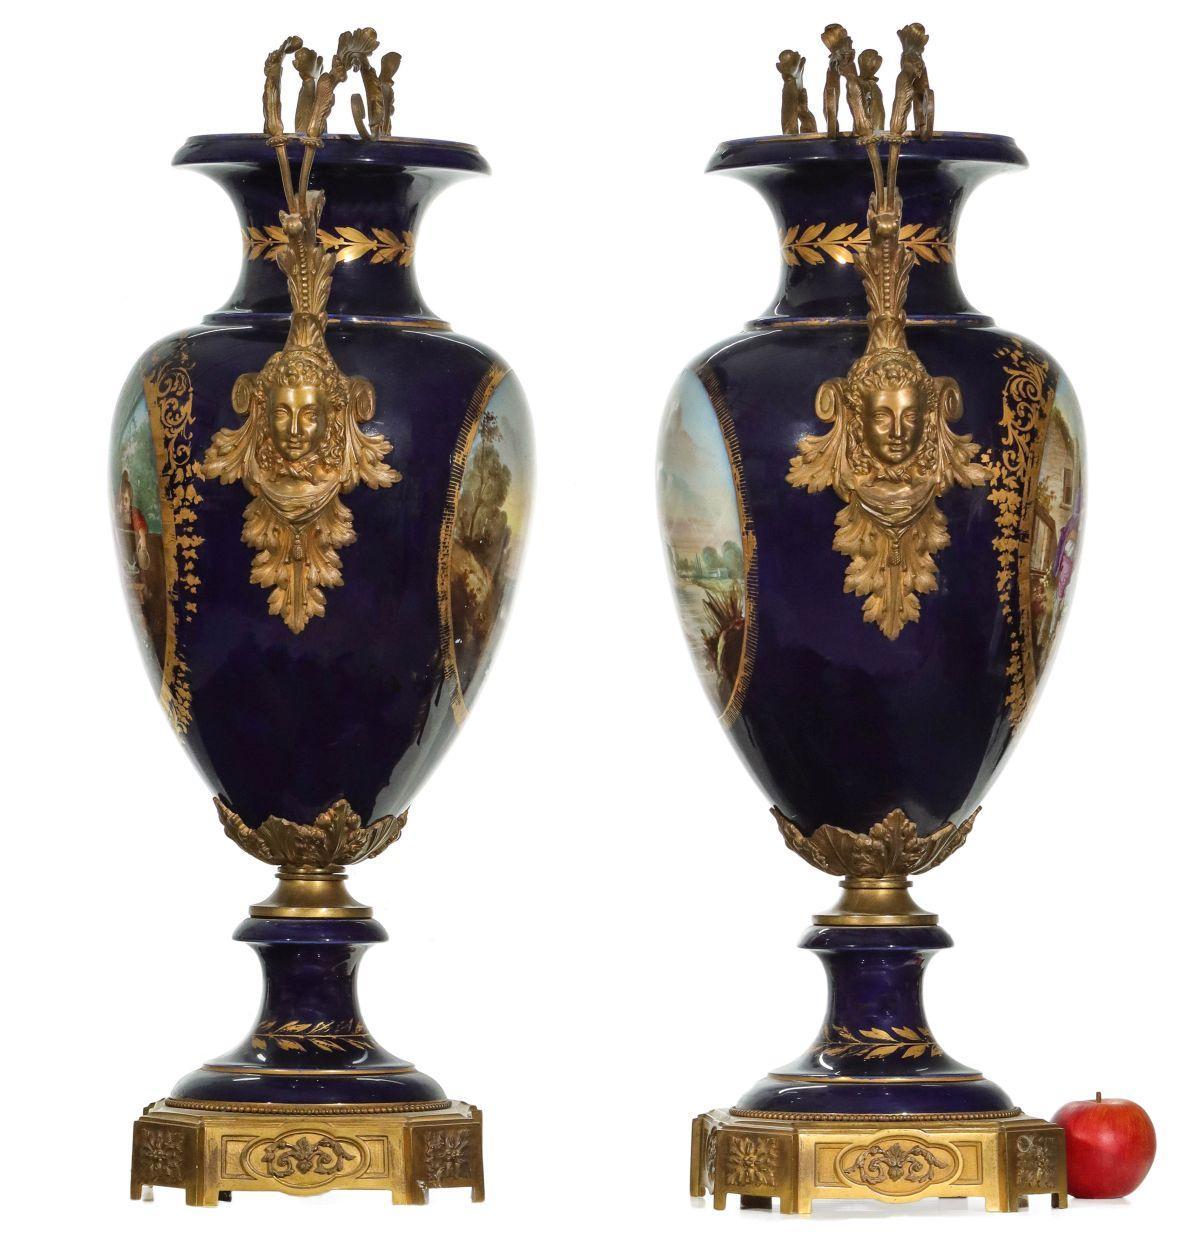 Pair of large 19 century french Louis XVI Sevres style cobalt blue ormolu mounted  porcelain vases with finely painted idyllic scenes of the countryside in the manner of Watteau, signed with monogram signature, TQuentin, and with well-cast gilt